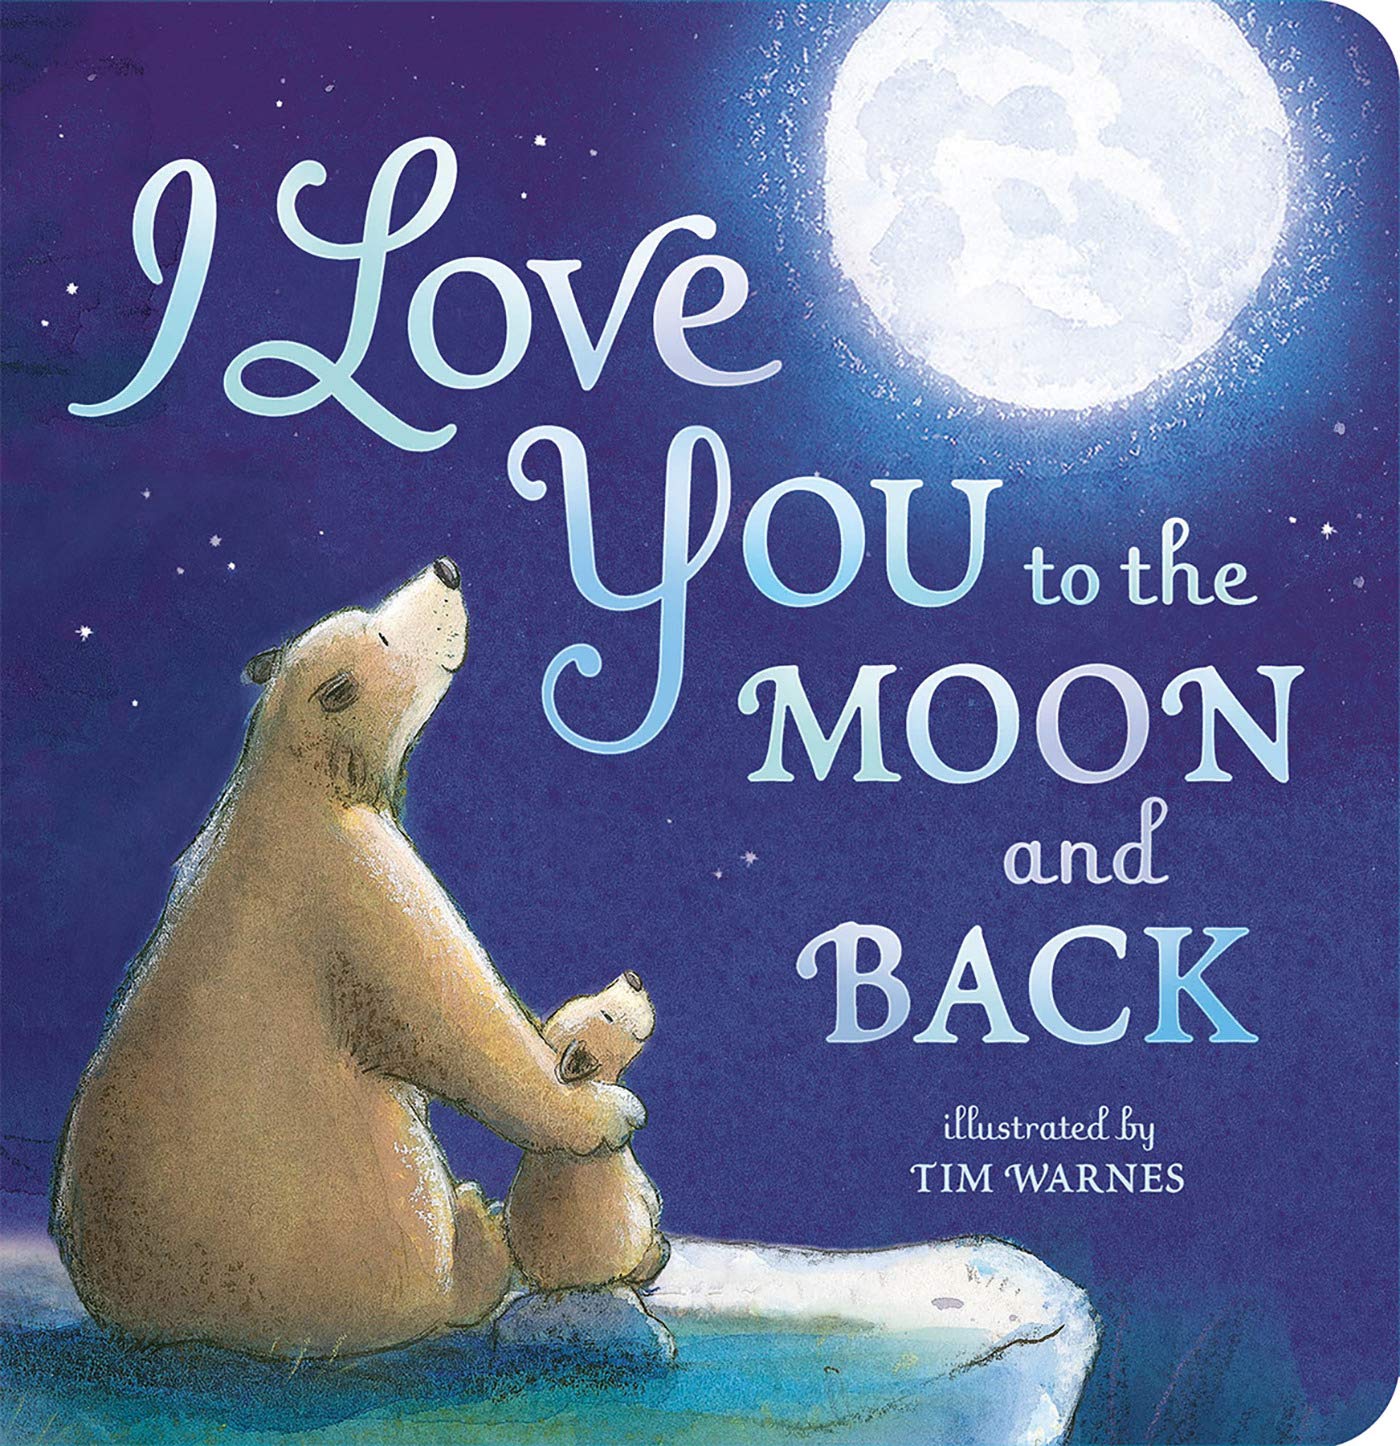 Image of "I Love You to the Moon and Back" book cover.